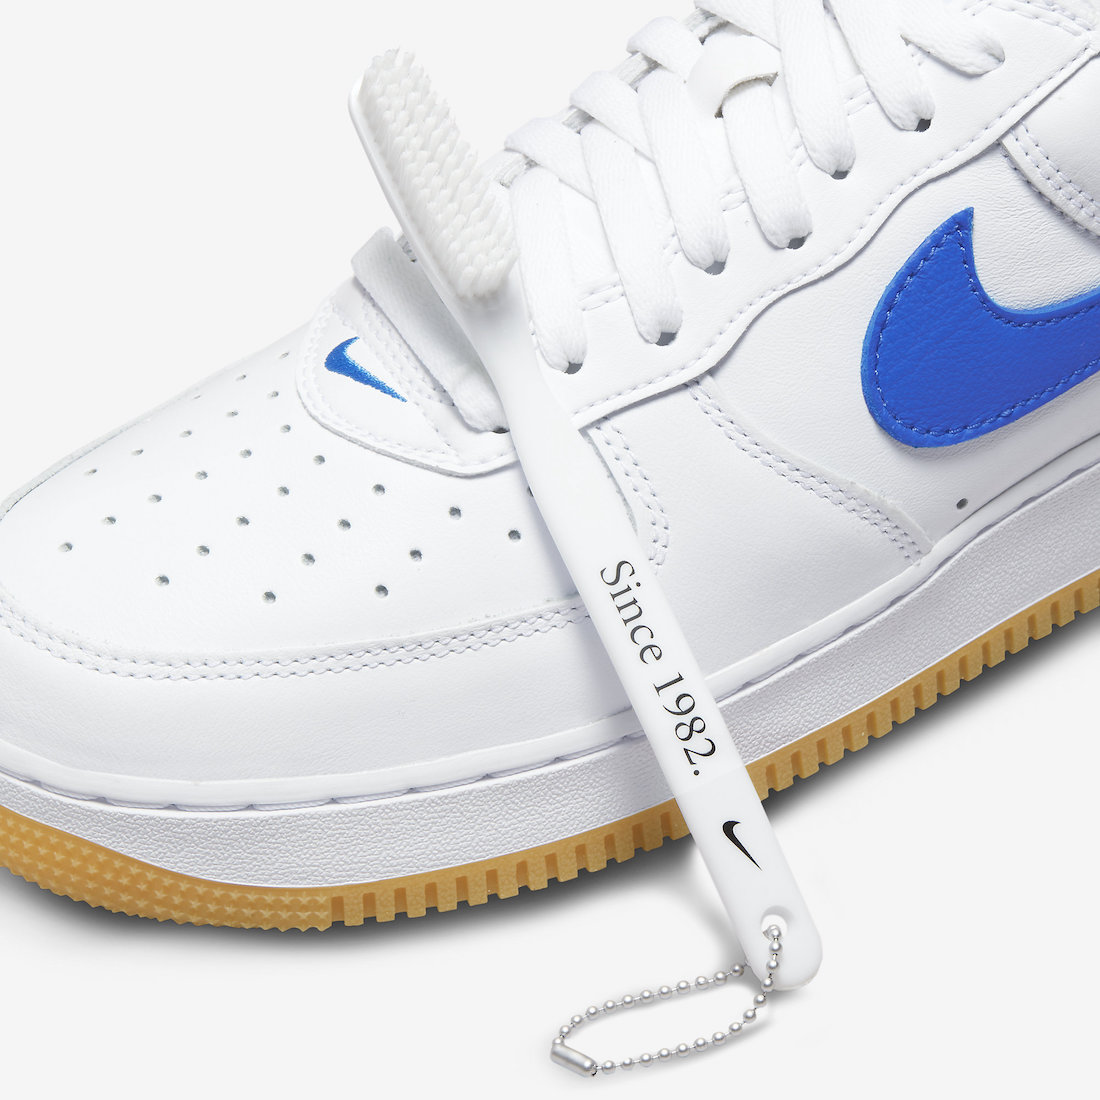 Nike Air Force 1 Low, Nike Air Force 1, Nike Air, NIKE, FORCE 1, Air Force 1